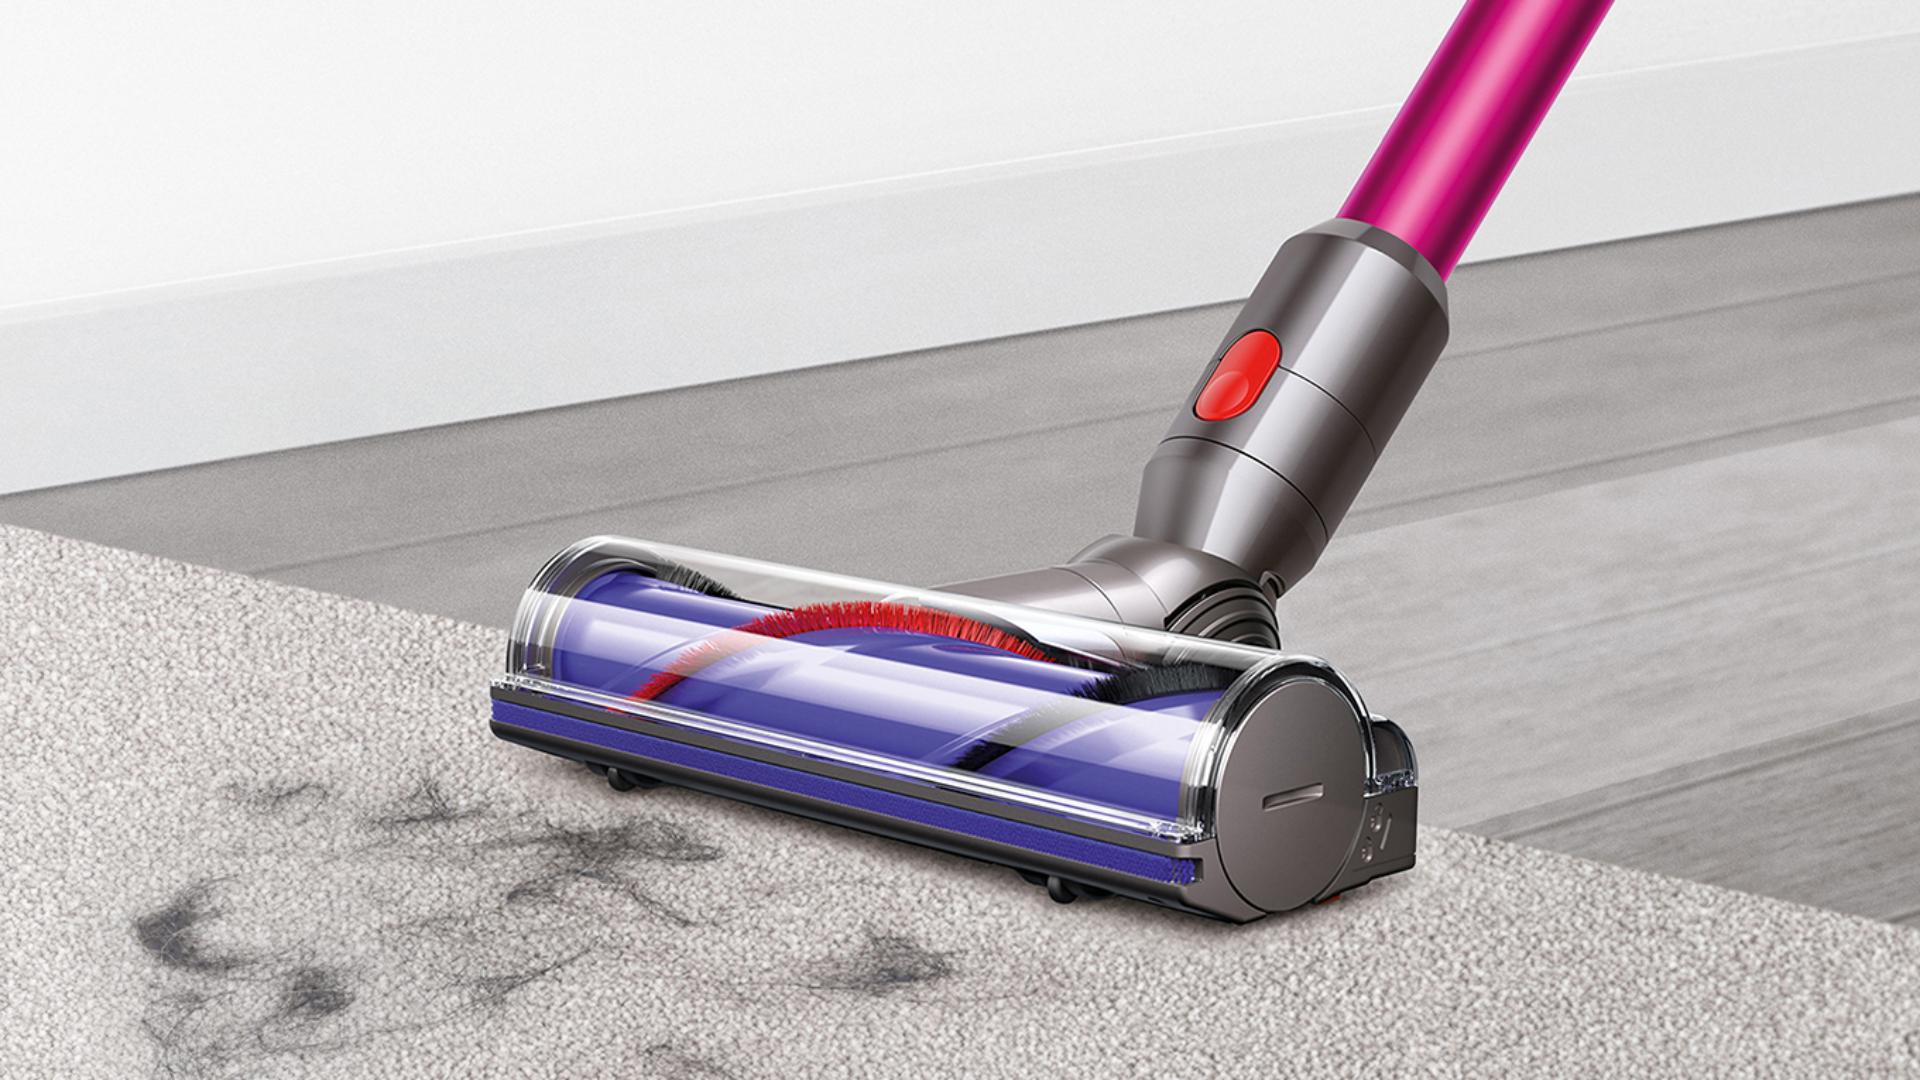 Direct drive cleaner head cleaning across carpet and hard floor.